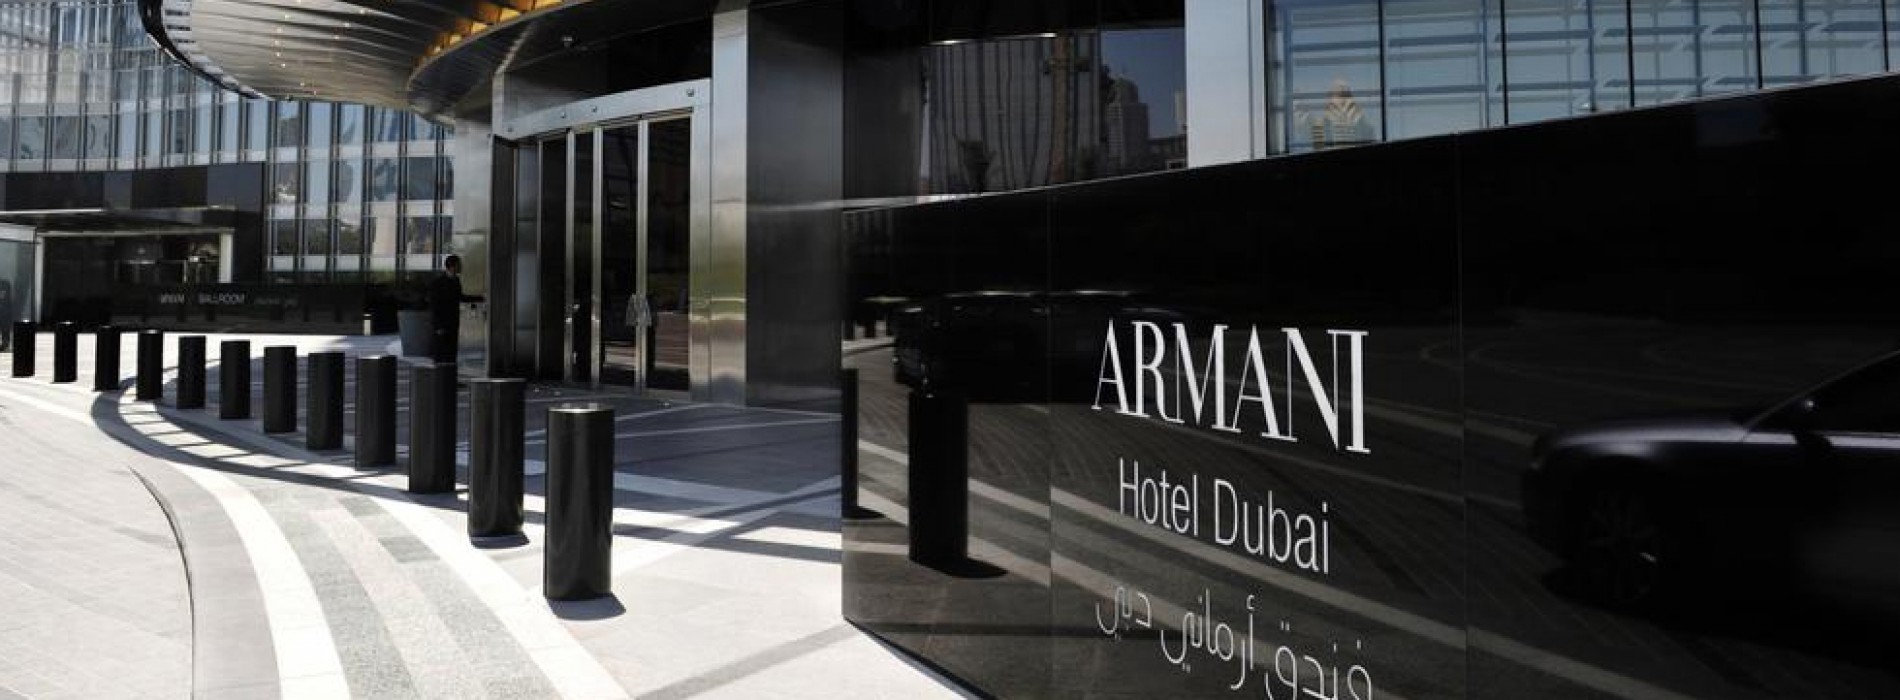 Leading Chinese travel site Ctrip awards ‘Chinese Preferred Hotel’ certification to Armani Hotel Dubai